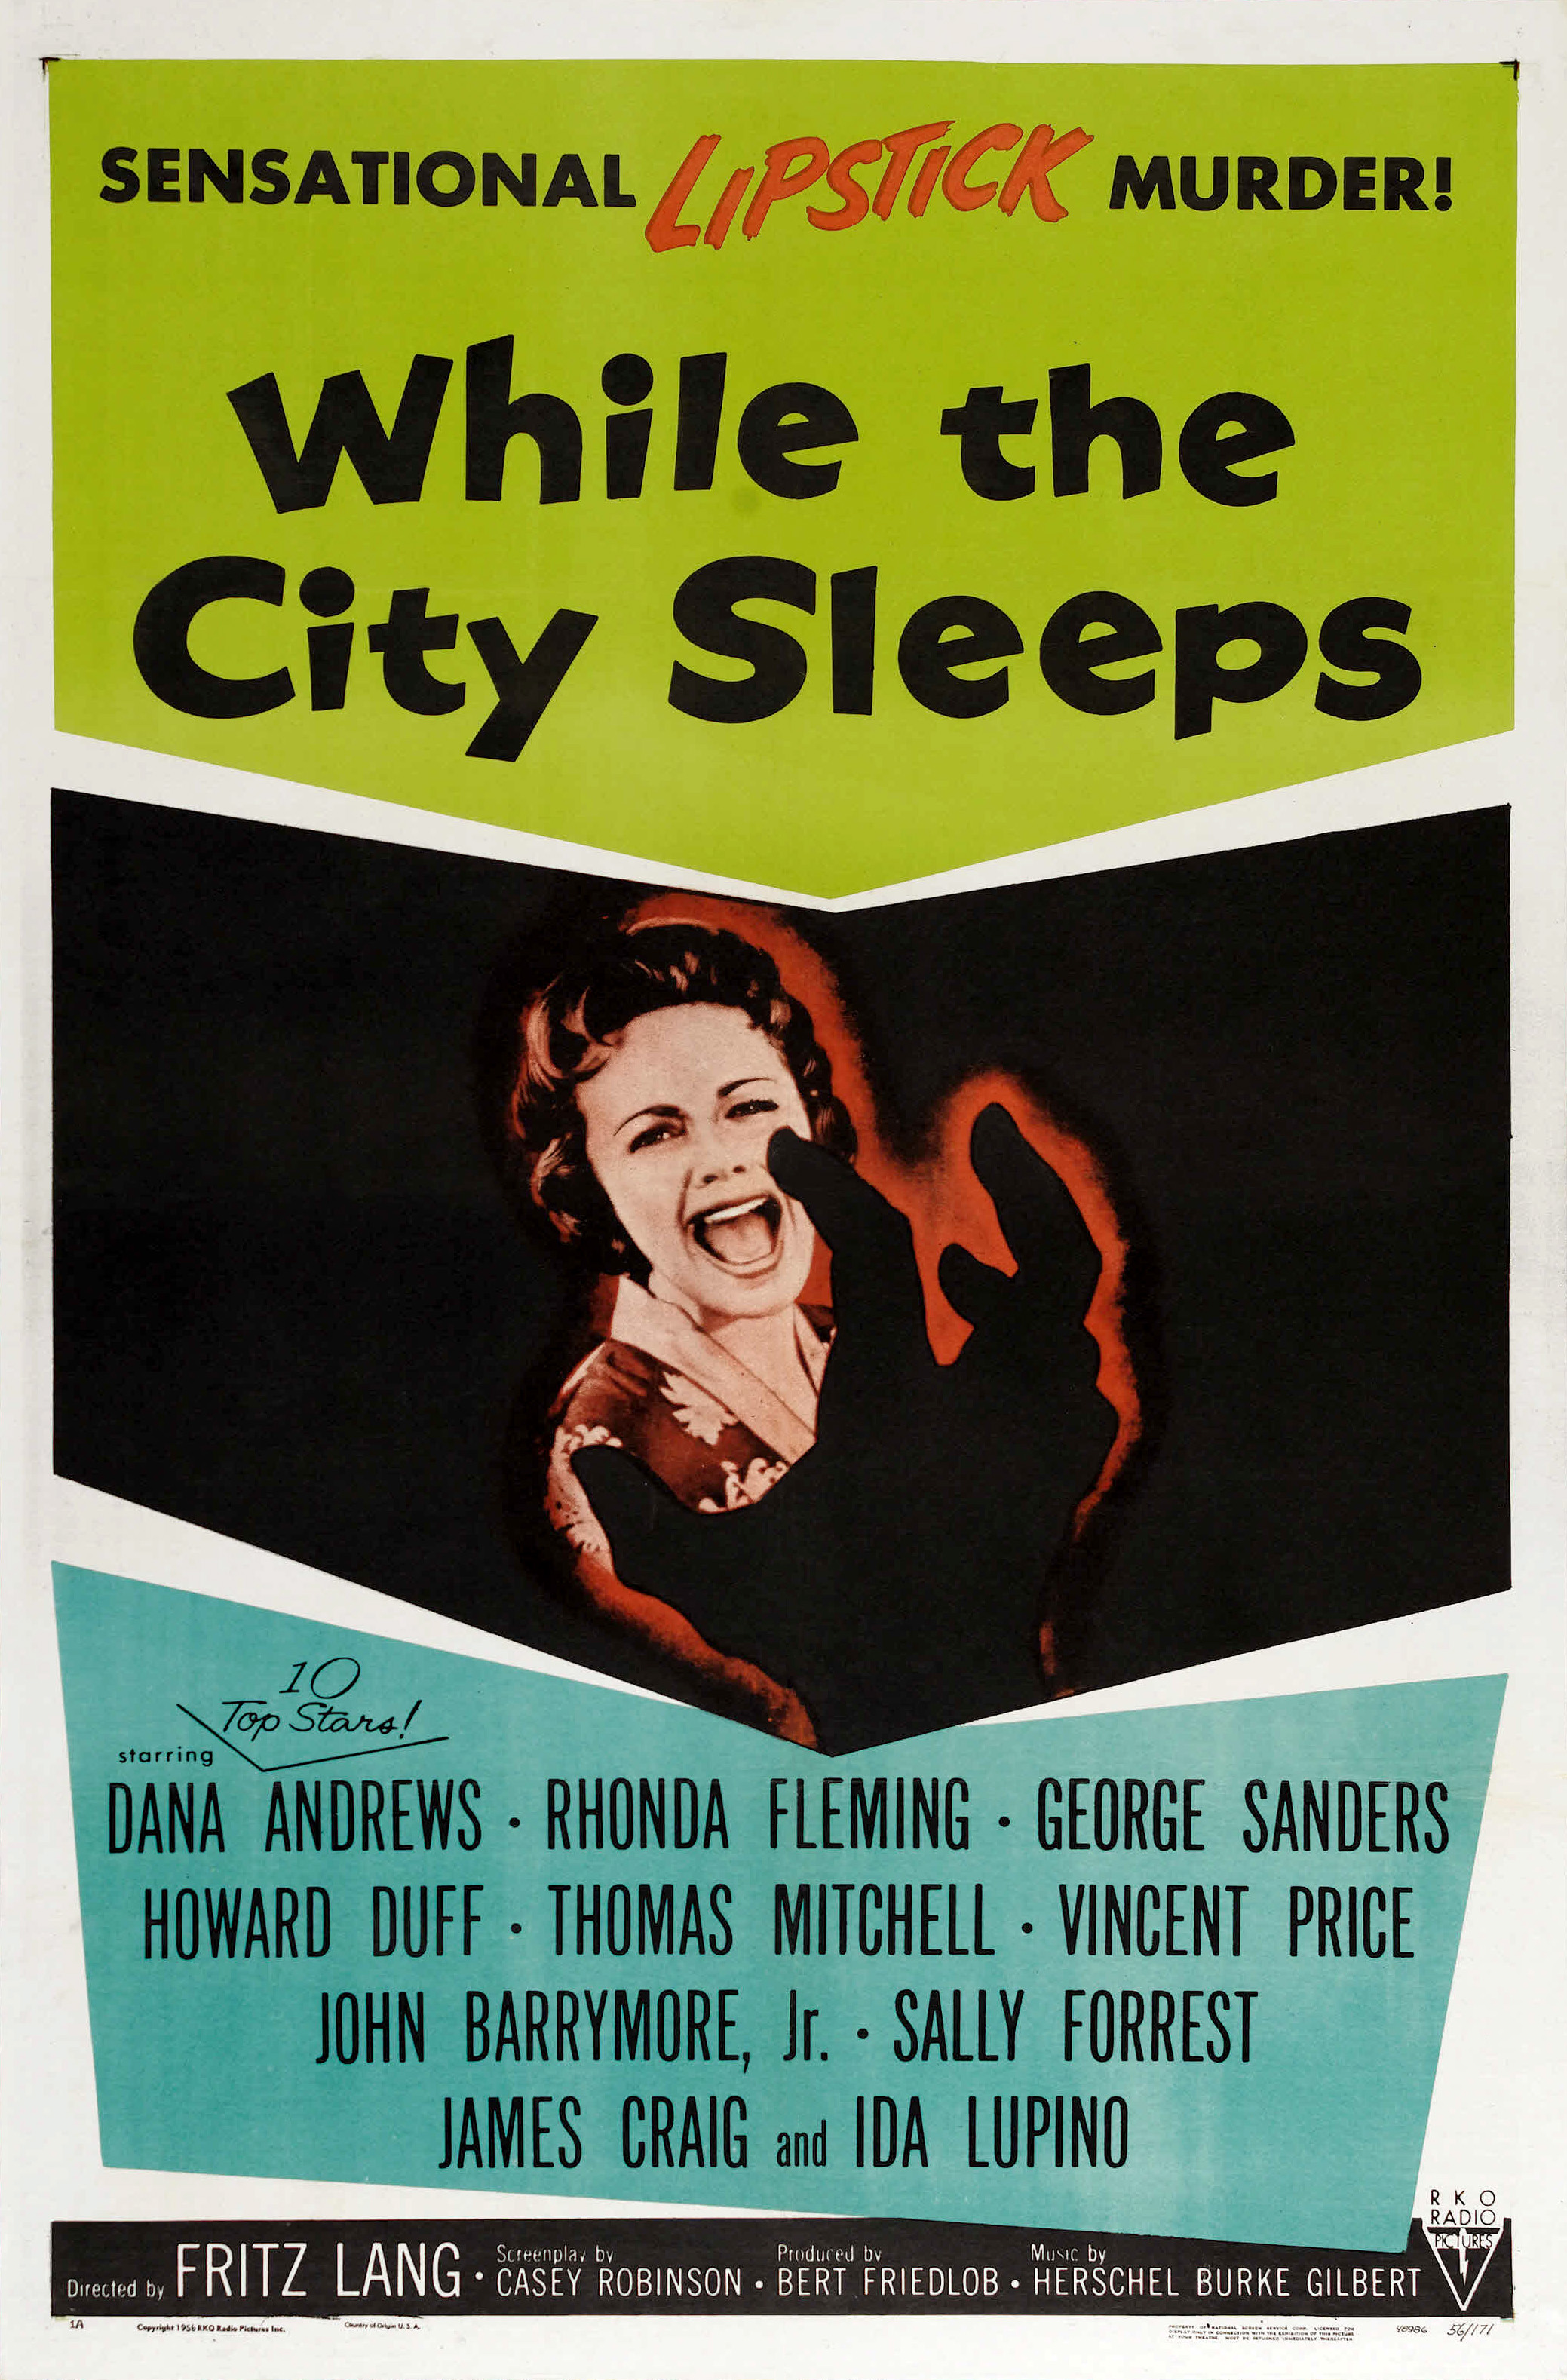 It is a movie poster with a lady with open mouth and a hand facing her. It has the words Sensational Lipstick Murder at the top and is followed by While the City Sleeps Title. Under the picture of the lady, it says top 10 stars which has names, Dana Andrews, Rhonda Fleming, George Sanders, Howard Duff, Thomas Mitchell, Vincent Price, John Barrymore Jr, Sally Forrest, James Craig, and Ida Lupino. At the bottom in a black border, it has Fritz Lang as Director with screenplay with Casey Robinson, etc. 